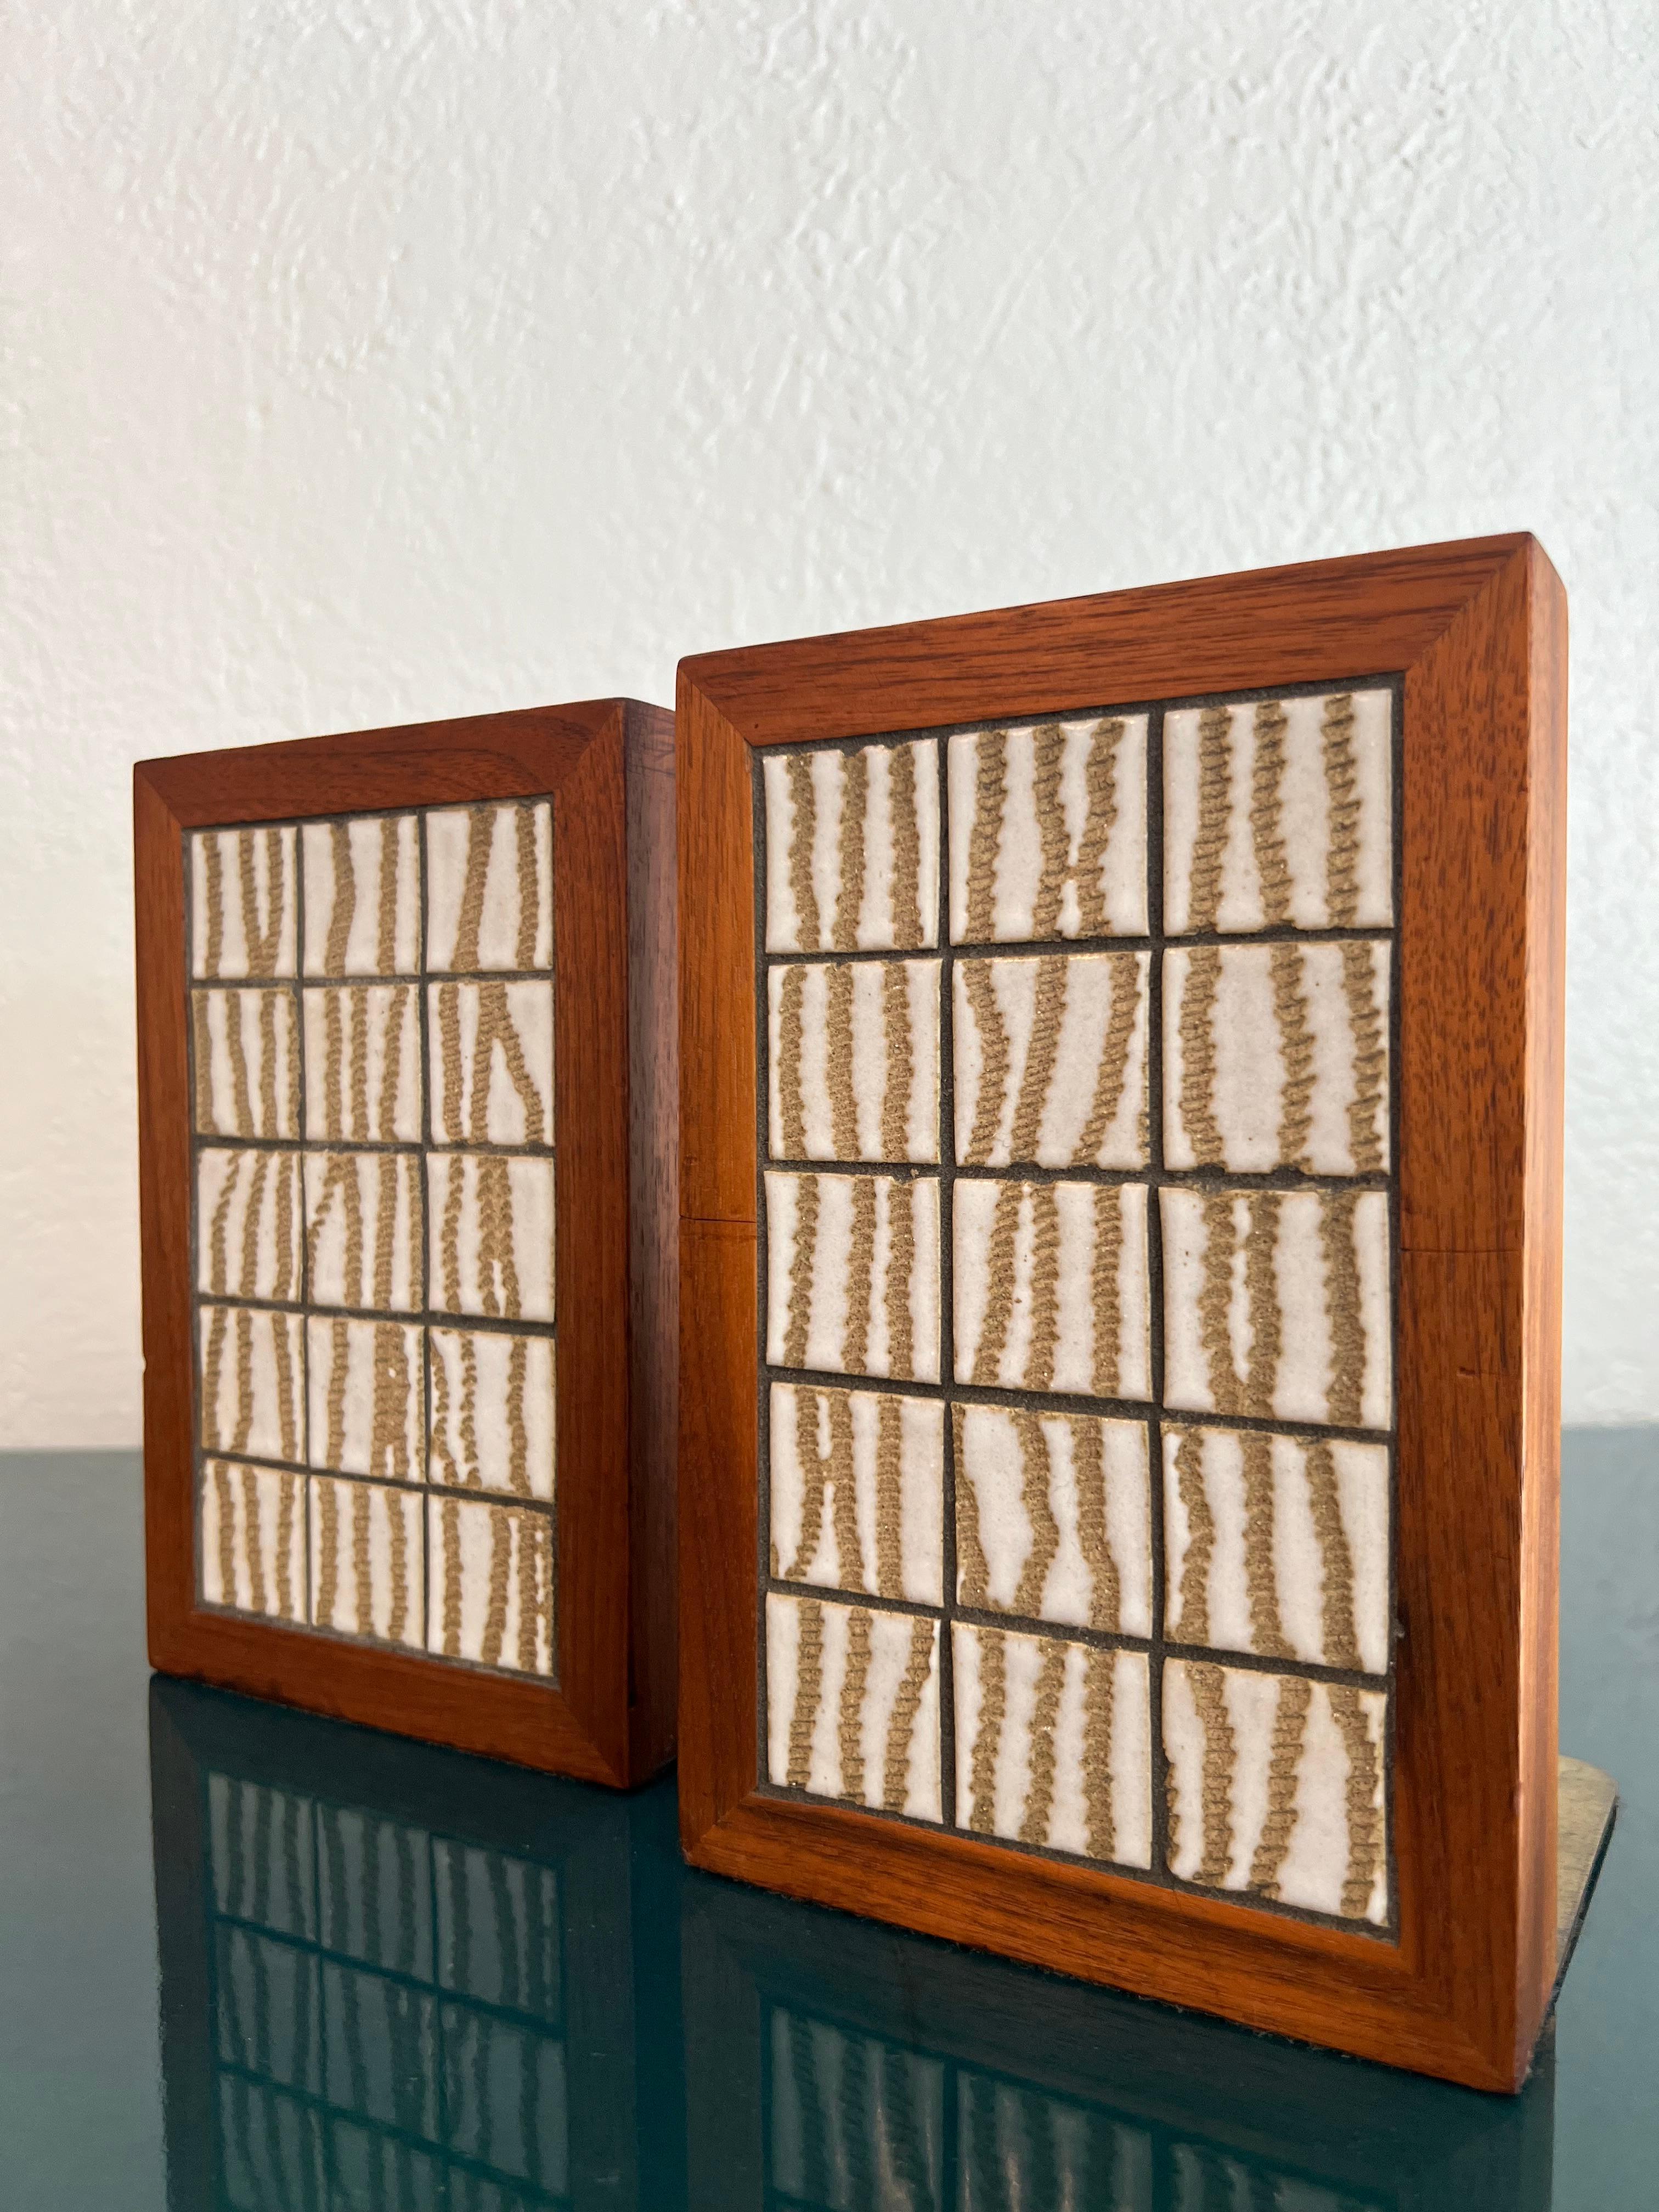 Jane & Gordon Martz walnut and ceramic tile inlaid bookends. Padded backsides for protection. Patina to the brass (please refer to photos). Additional photographs available upon request.

Would work well in a variety of interiors such as modern, mid